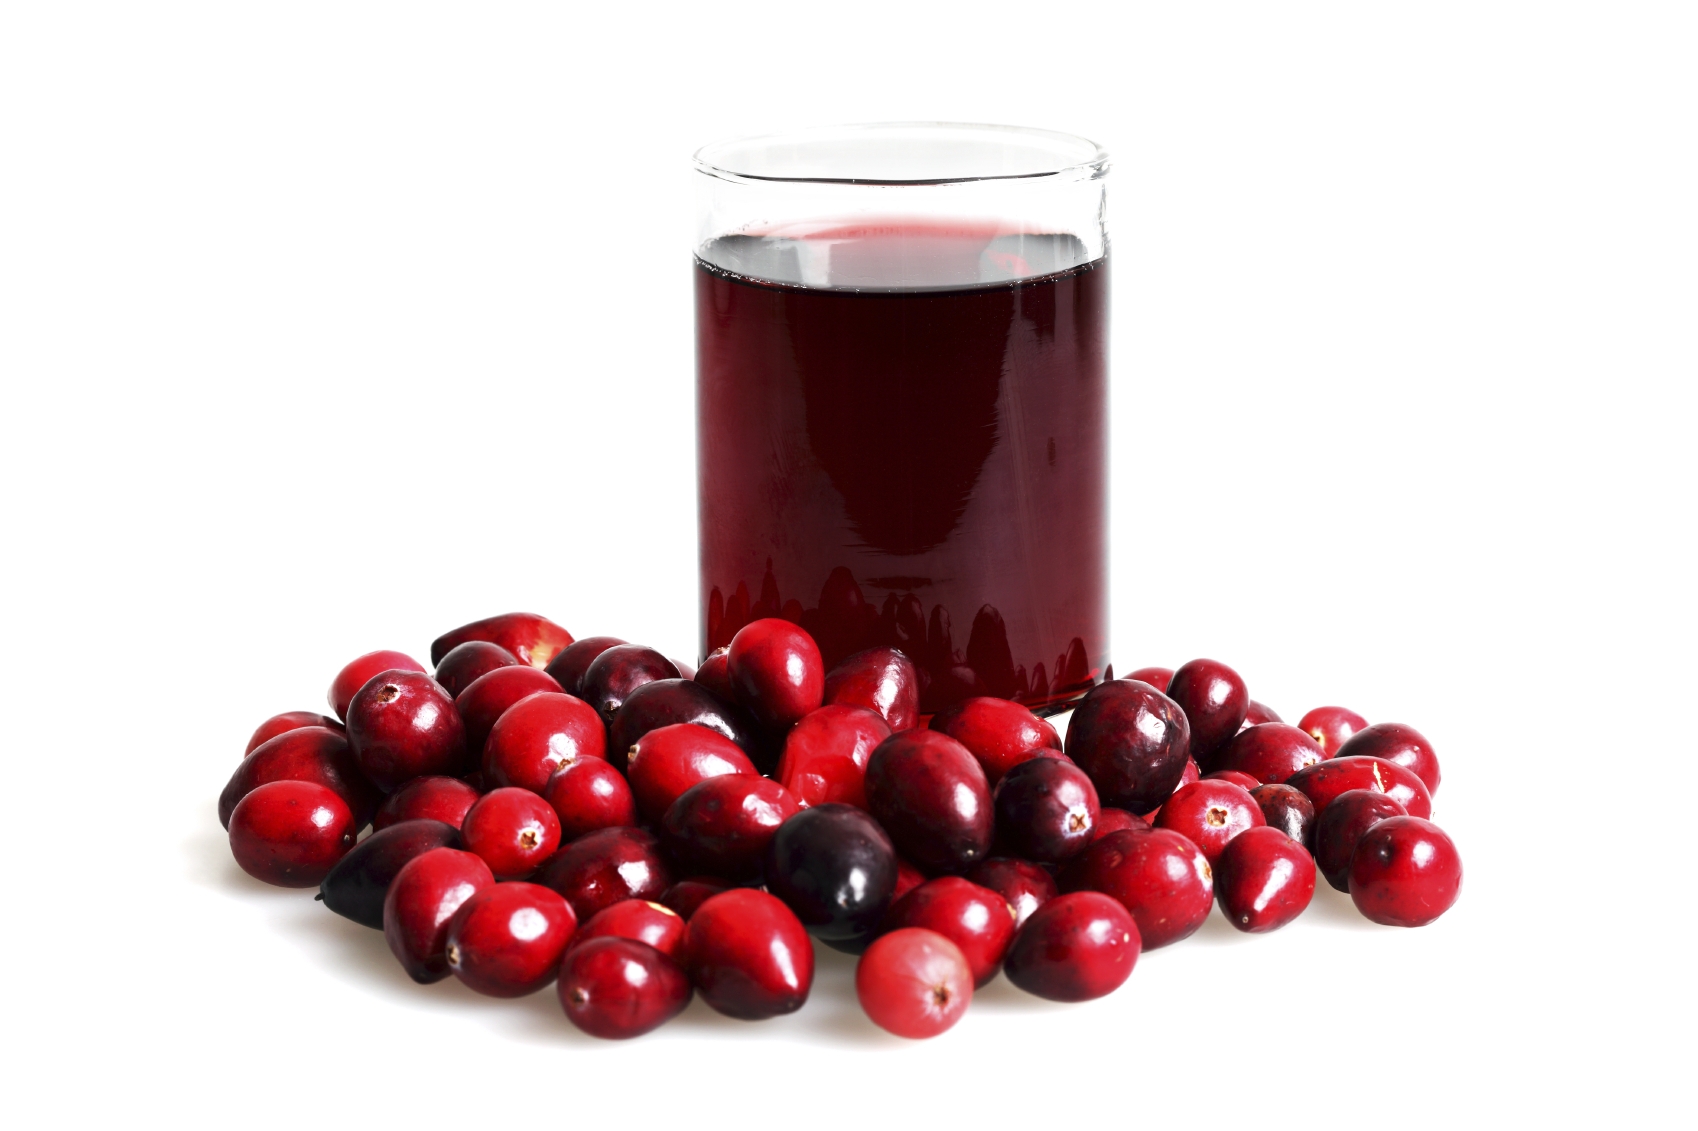 Studies suggest cranberry juice can help ward off urinary-tract infections and might even prevent periodontitis and gingivitis by keeping bacteria from adhering to your teeth and gums